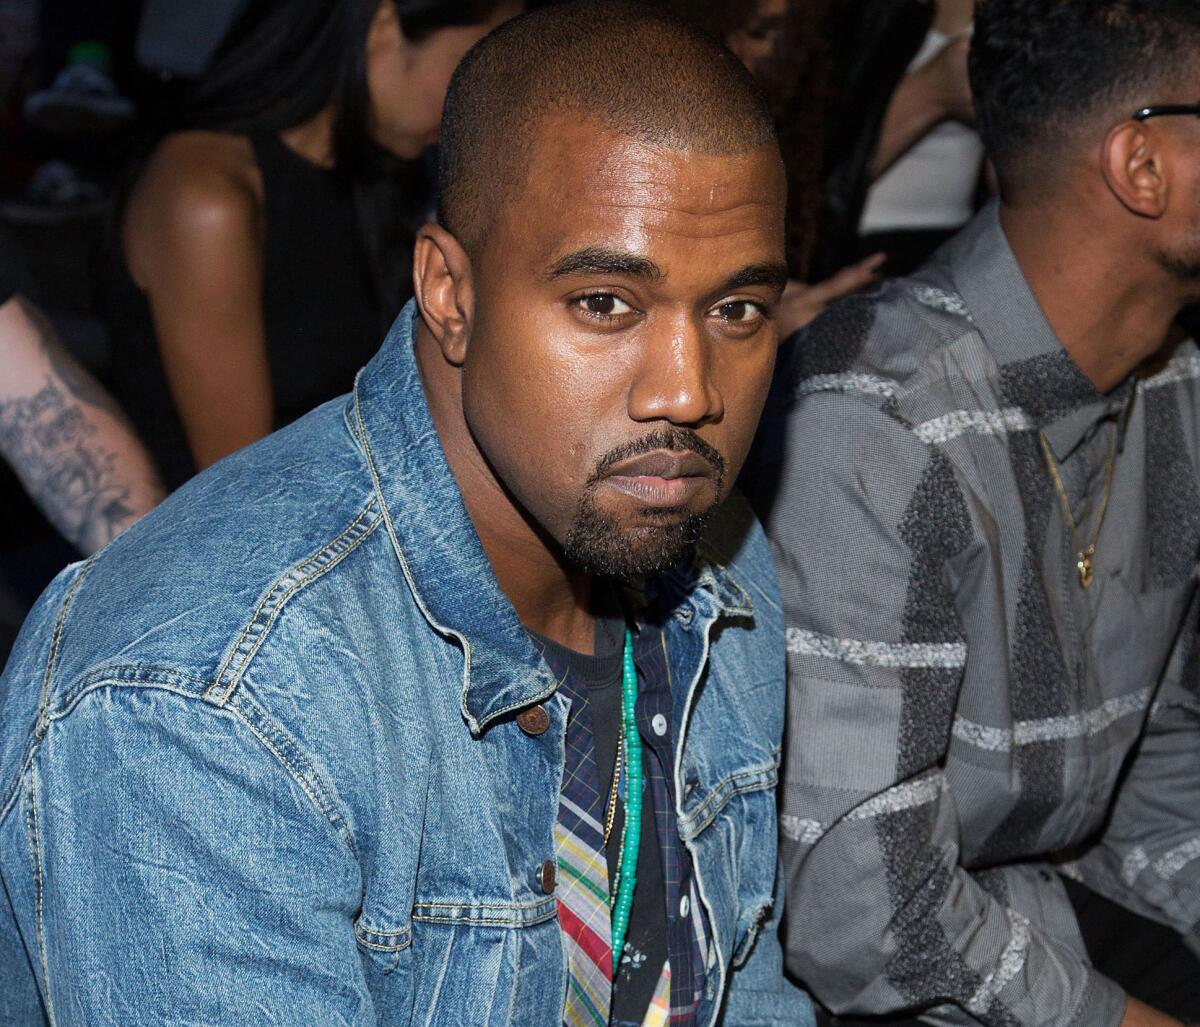 Kanye West, seen here at a New York fashion show earlier in the month, has recently put L.A. Times writer Chris Lee in his Twitter cross hairs.